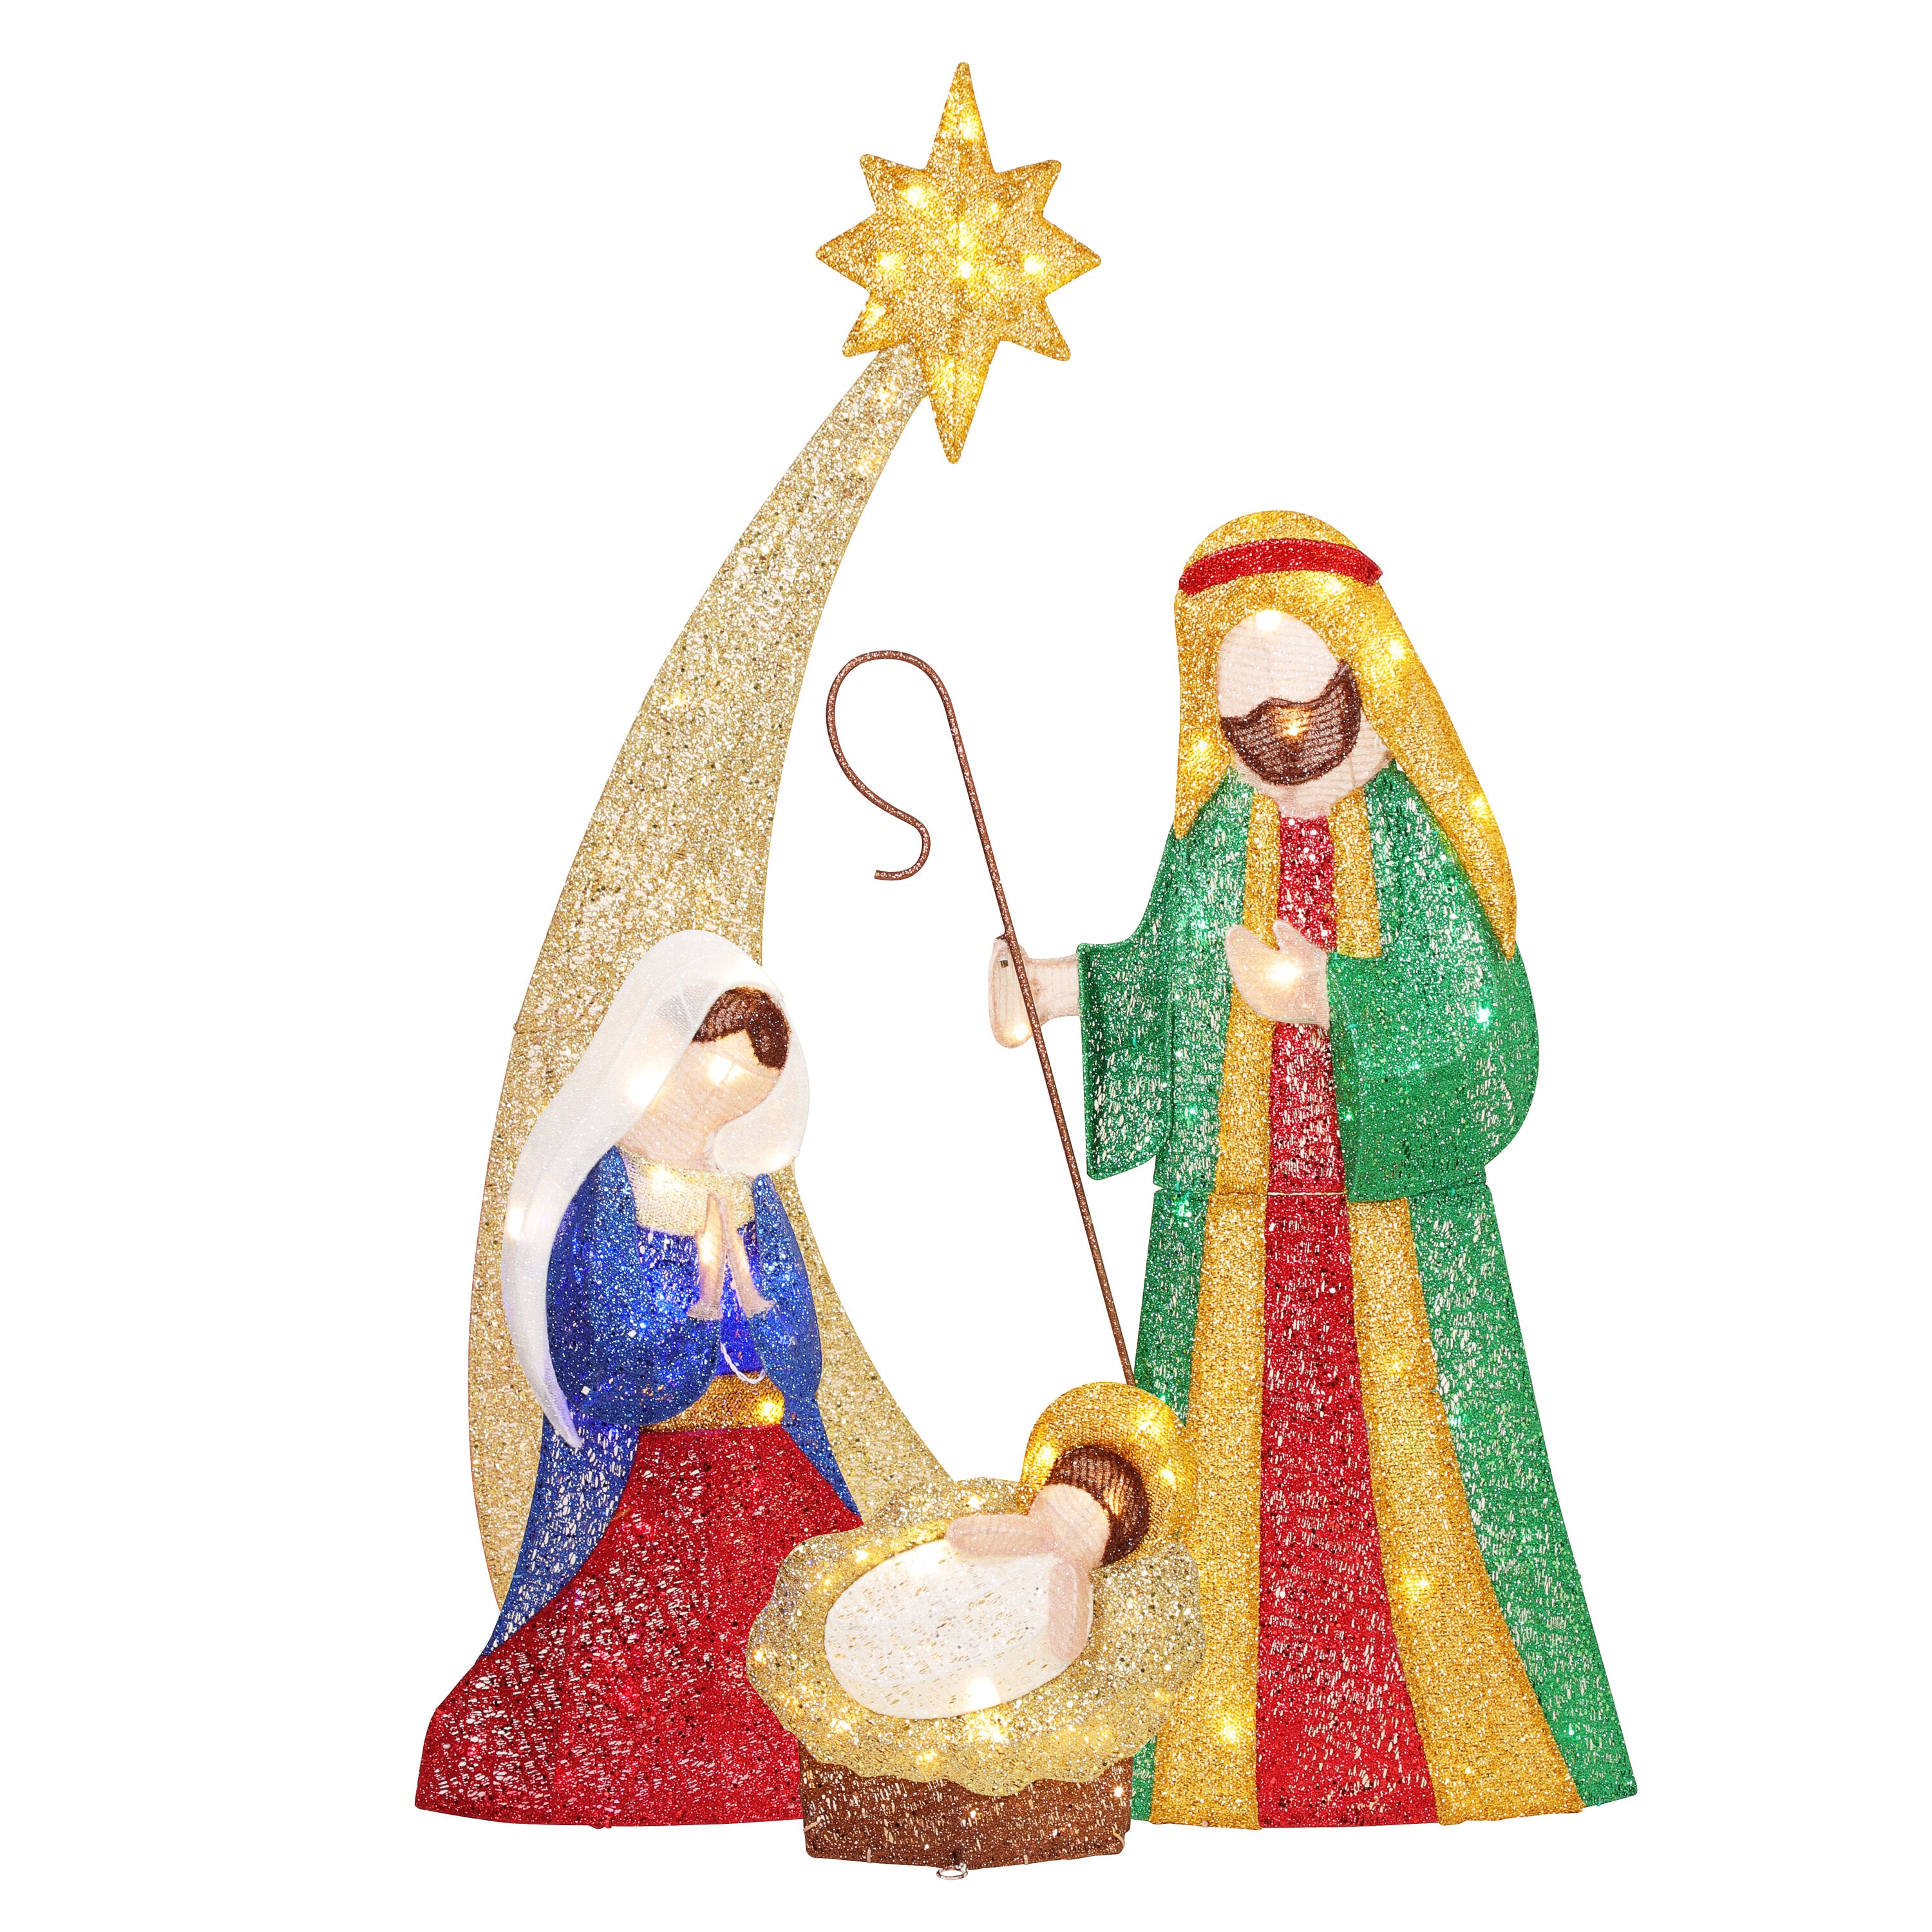 Holy Family Christmas Decorations at Lowes.com